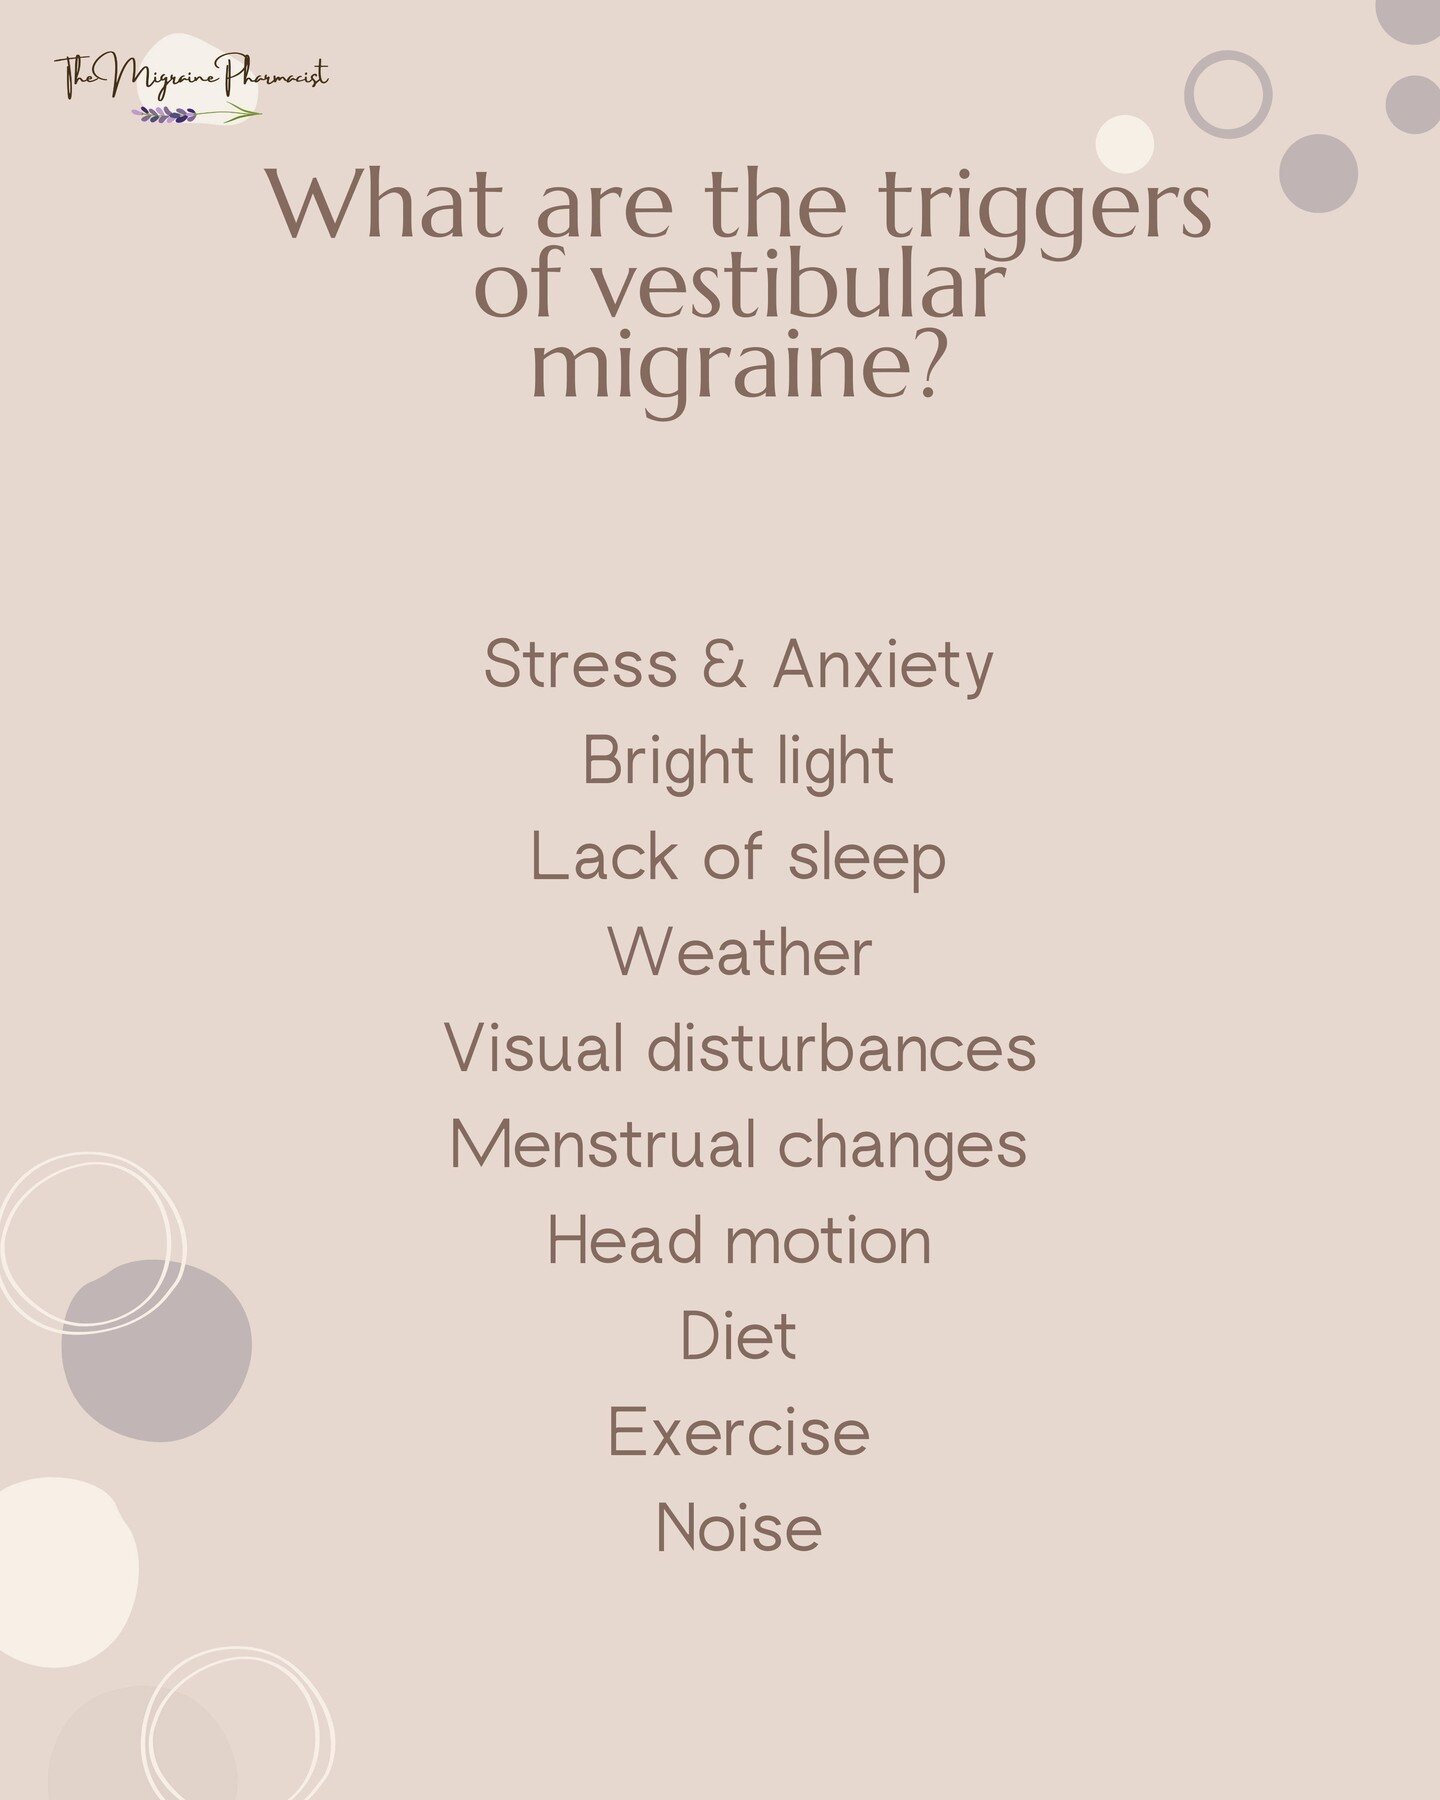 Triggers of vestibular migraine are very similar to migraine triggers, most notably sleep and motion.
Remember to go back to the self-care plan we talked about in previous posts to identify changes you can implement that might have an impact on your 